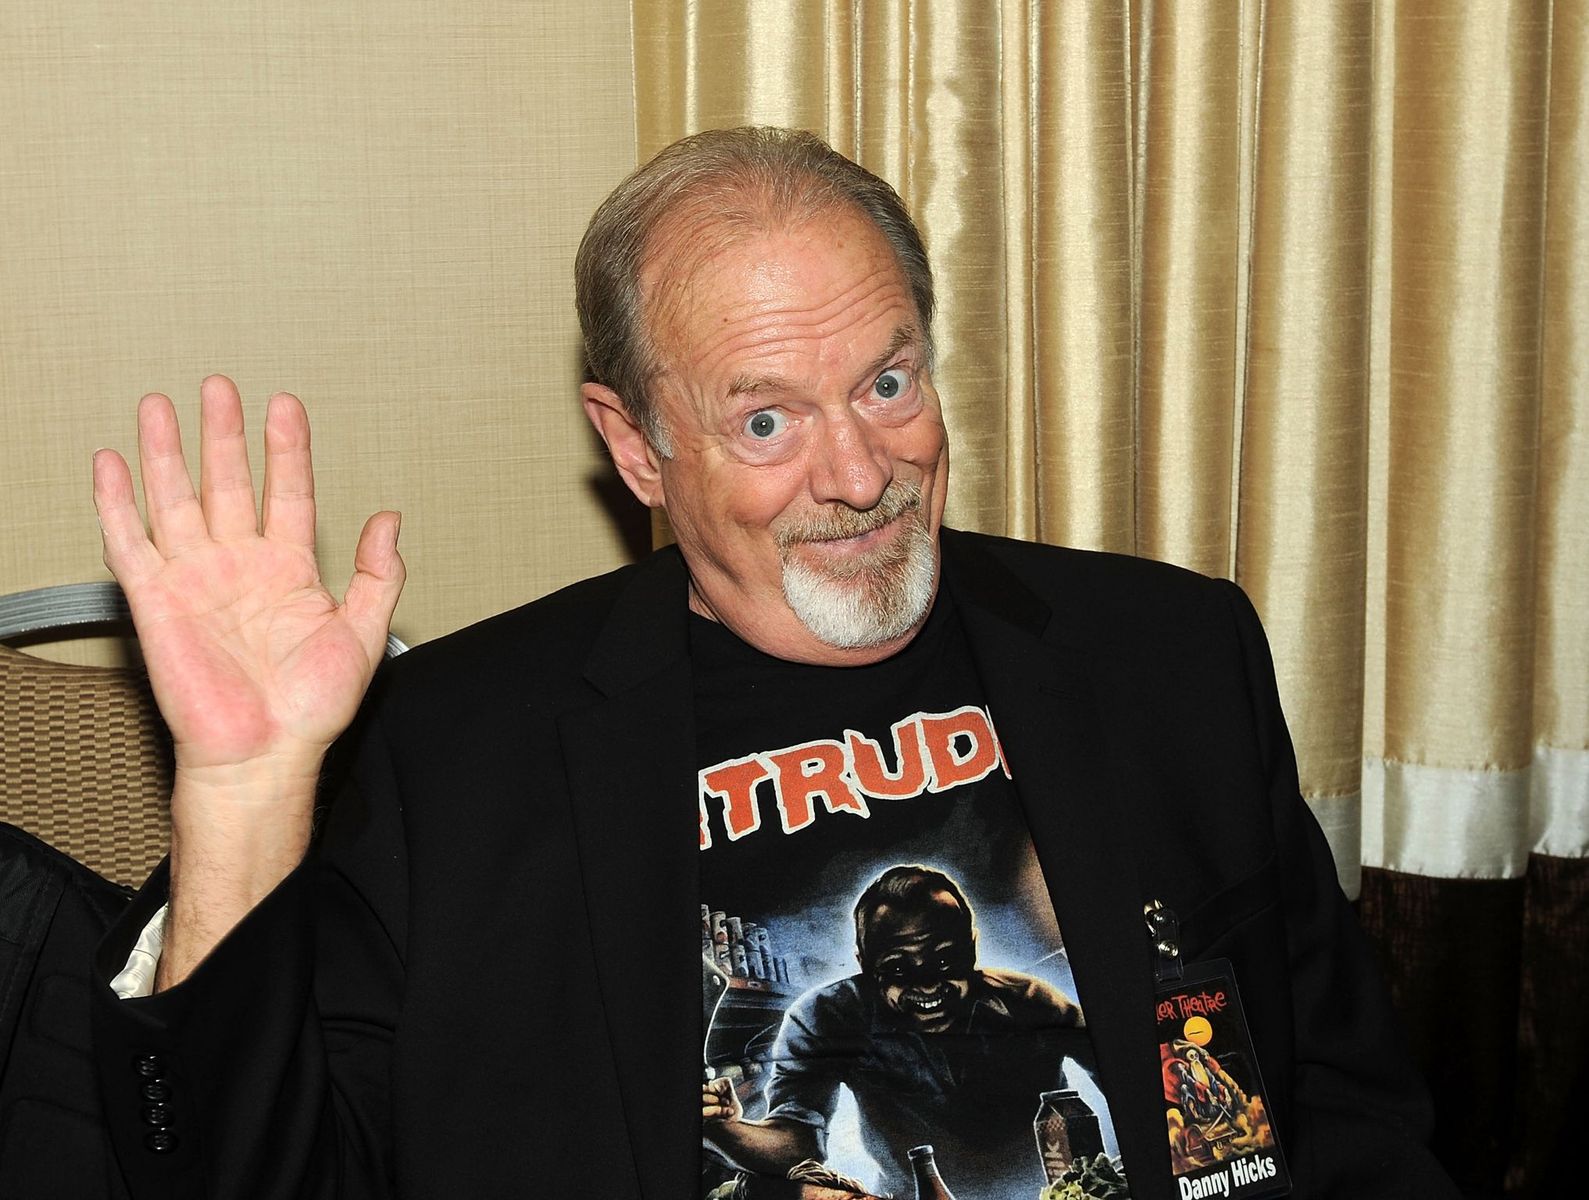 Danny Hicks at the Chiller Theater Expo on April 22, 2016, in Parsippany, New Jersey | Photo: Bobby Bank/WireImage/Getty Images